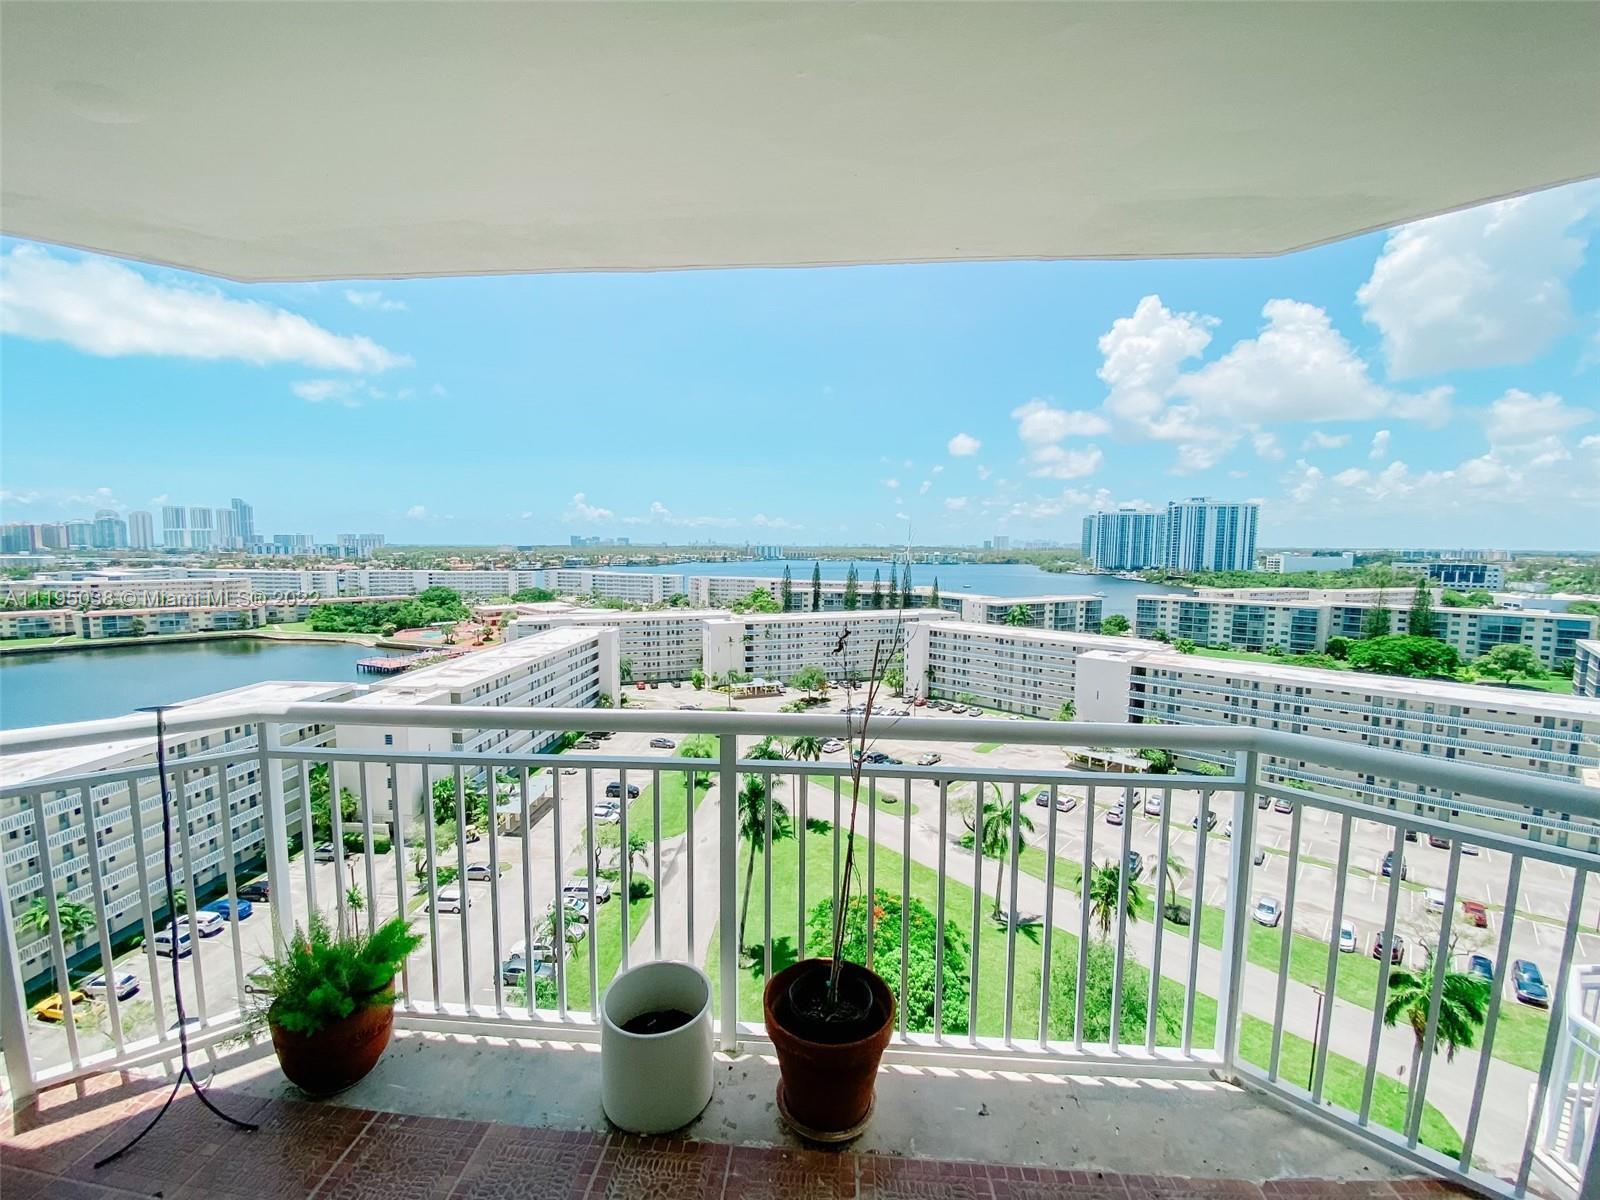 Million dollar view from this top floor unit. Located in the heart of Aventura FL, this 3 bedrooms a